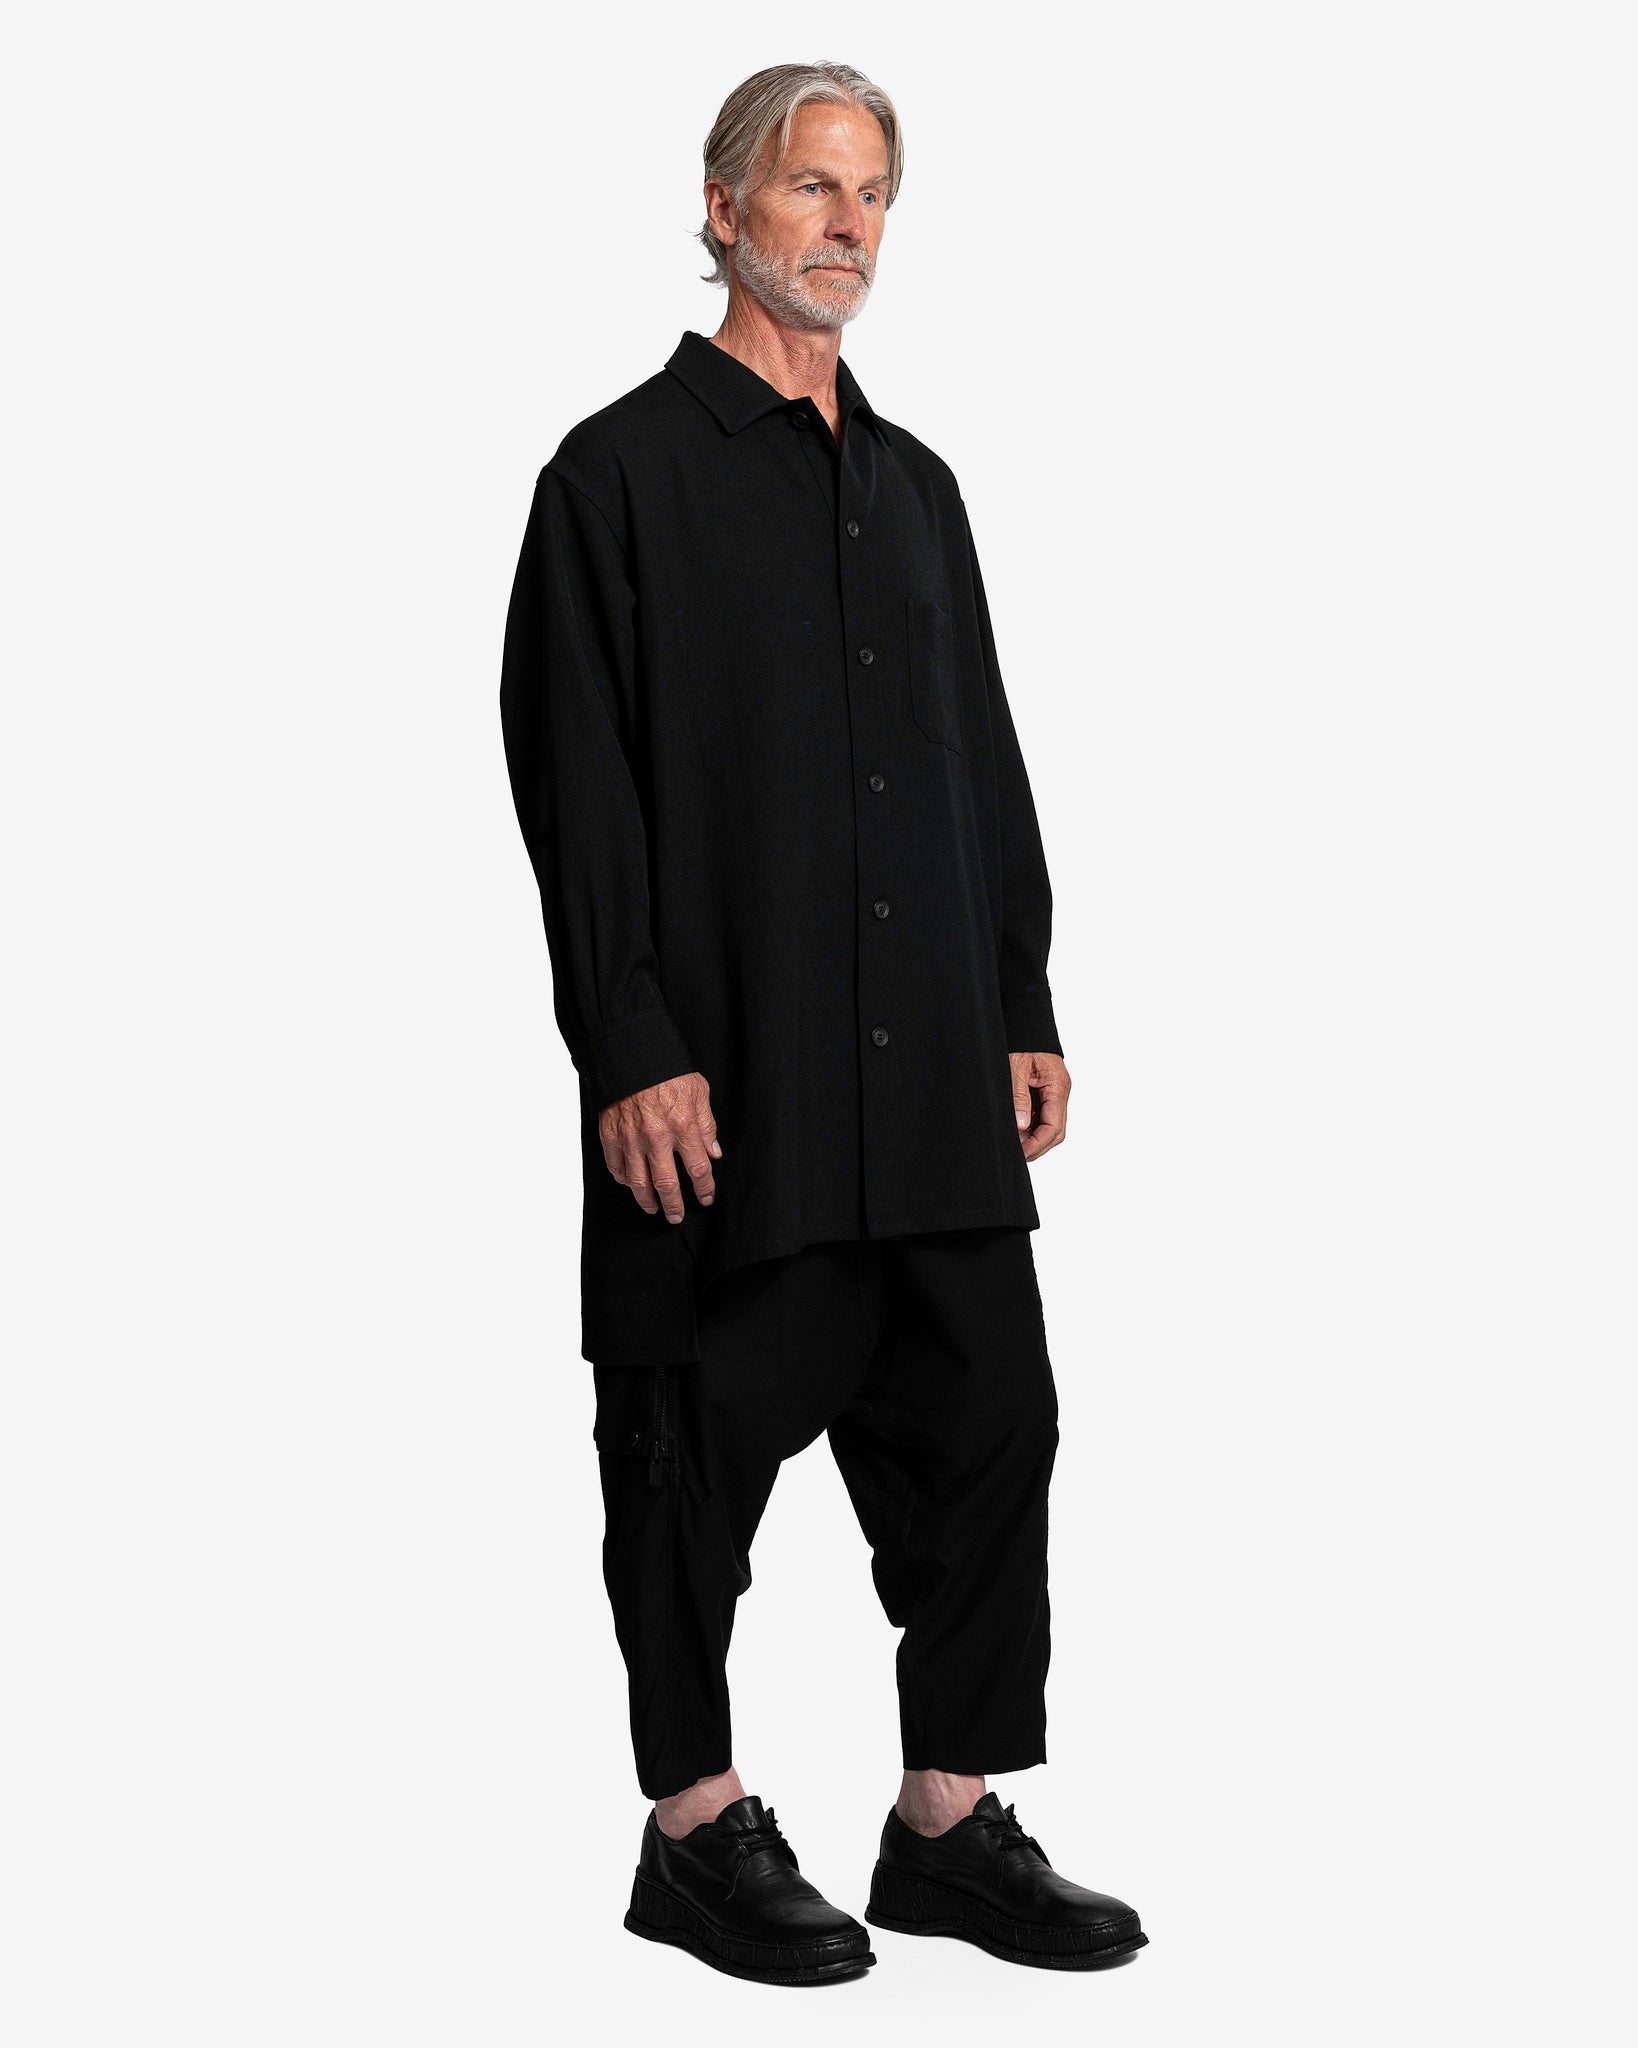 Cotton Twill Sarouel Pants with Zipper Details in Black 02 at Svrn